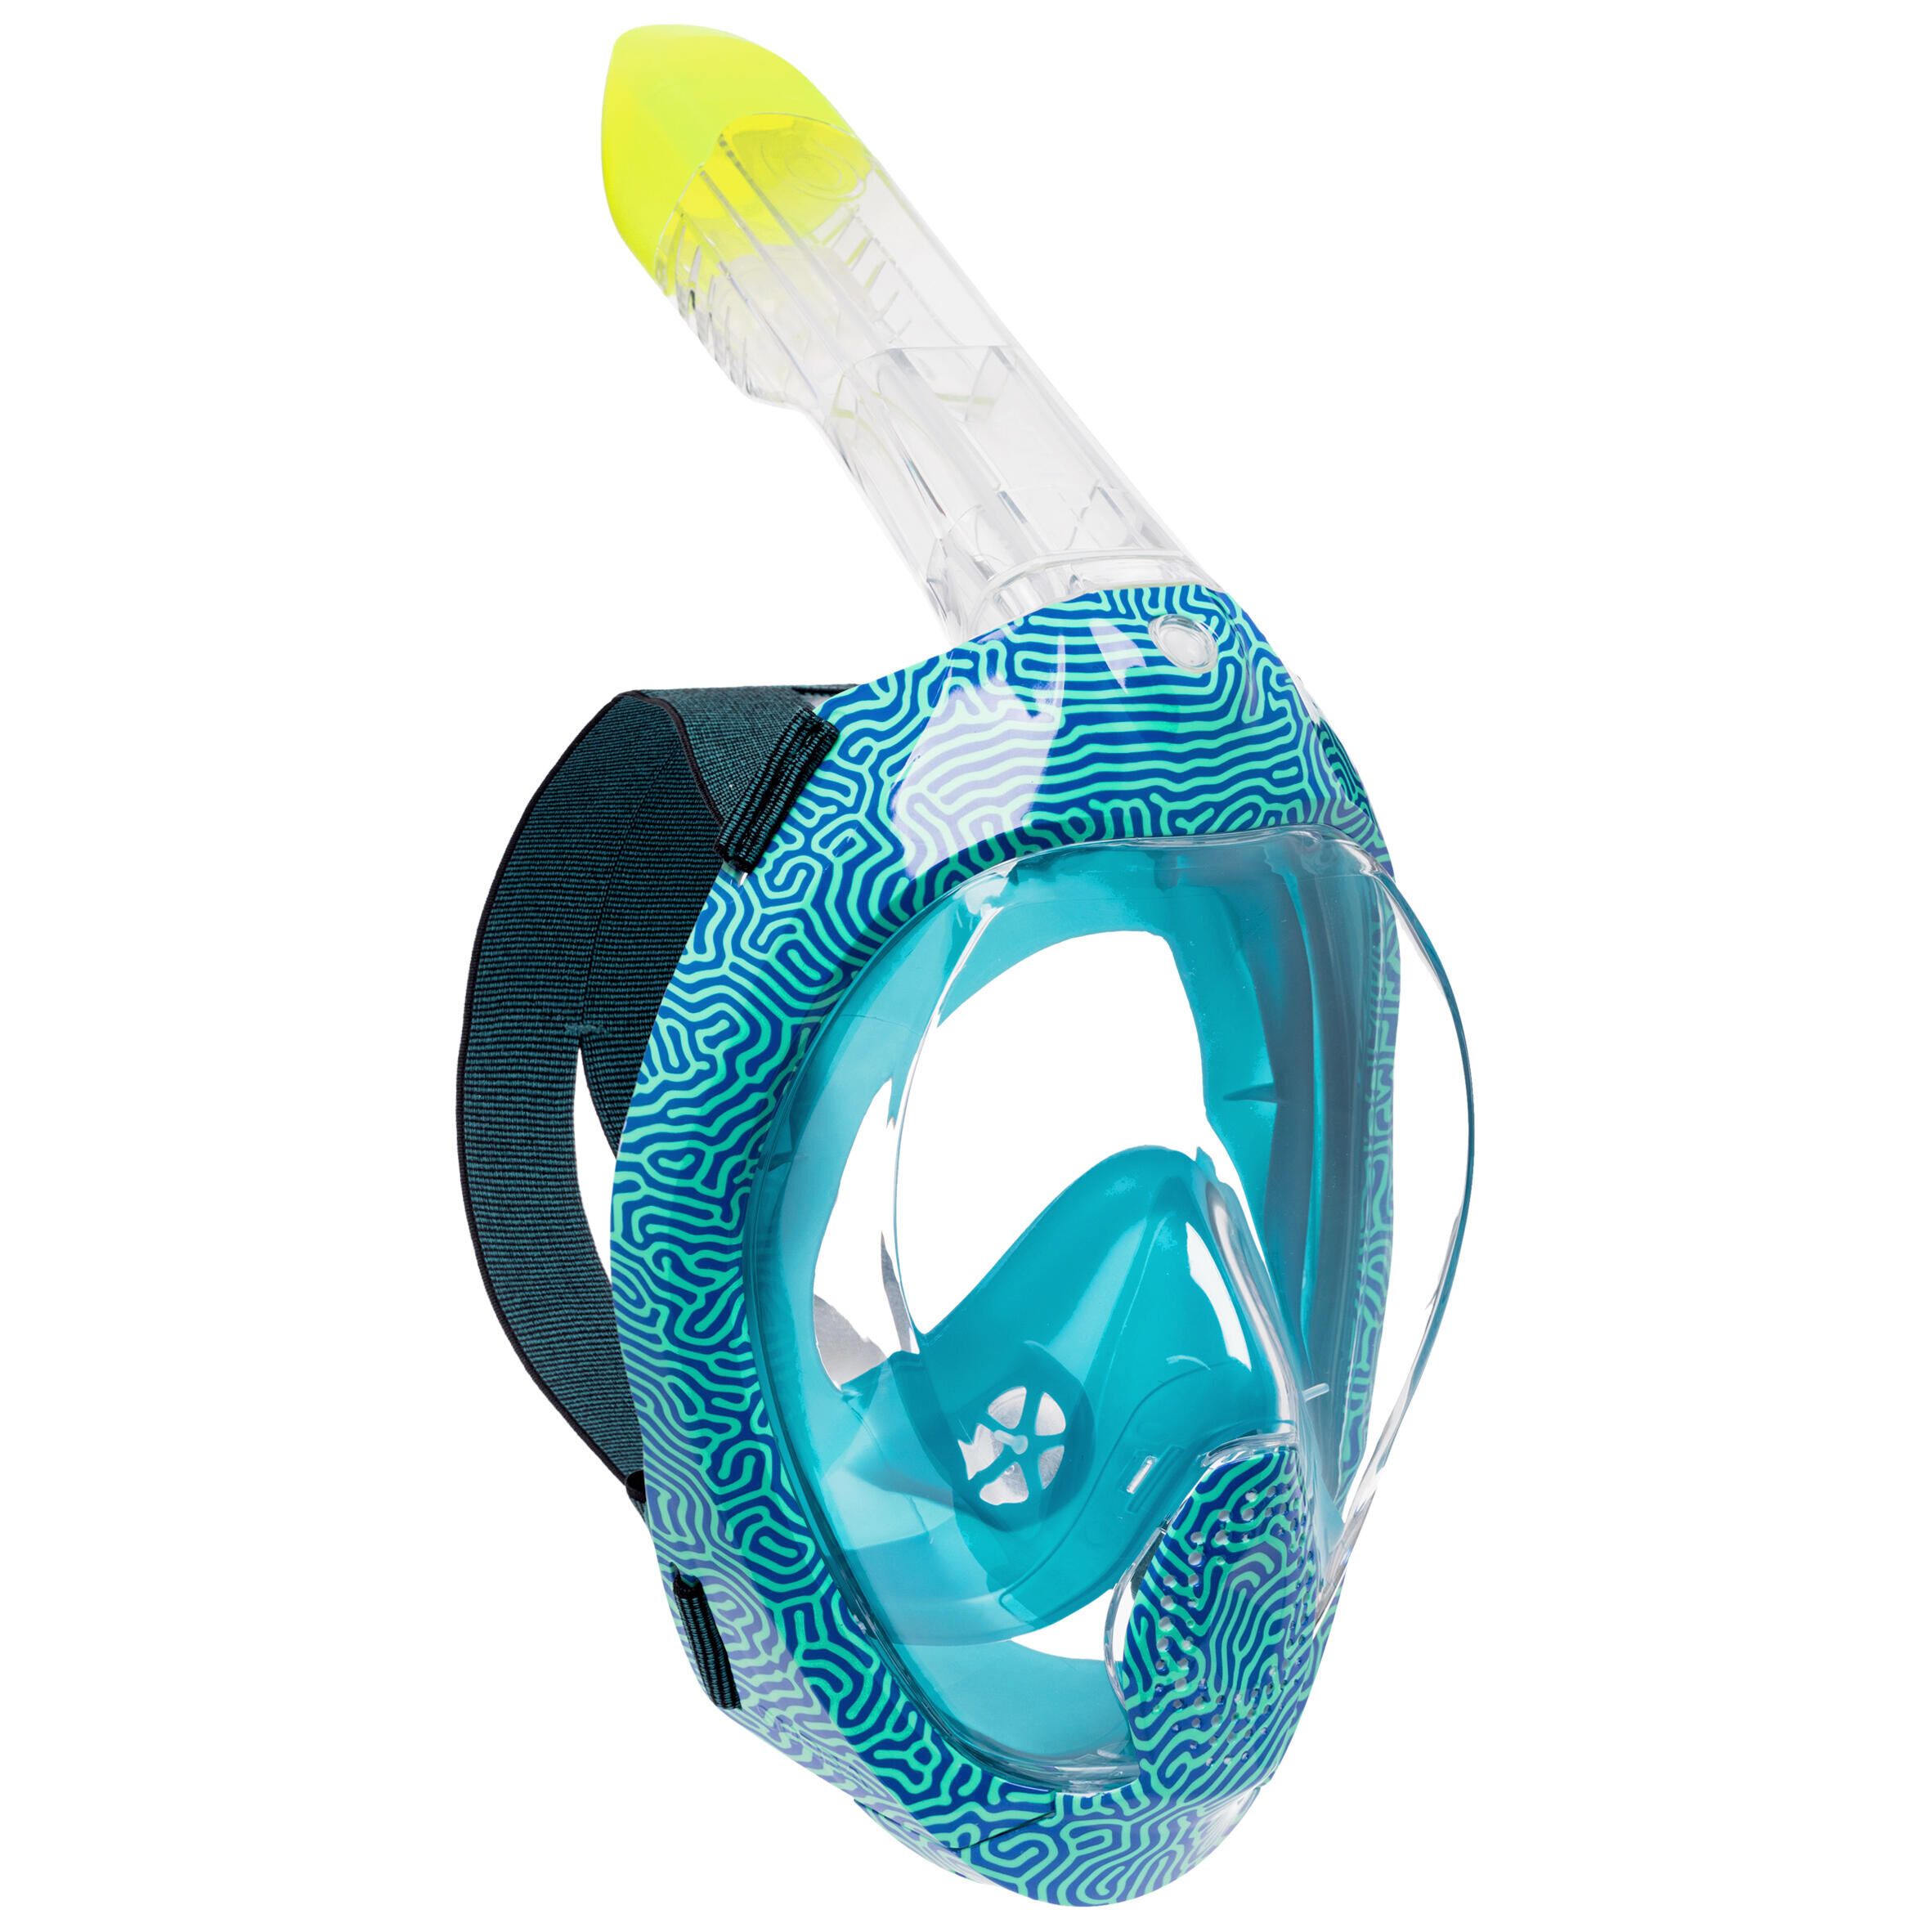 SUBEA Adult's Easybreath+ mask with an acoustic surface - 540 freetalk coral green